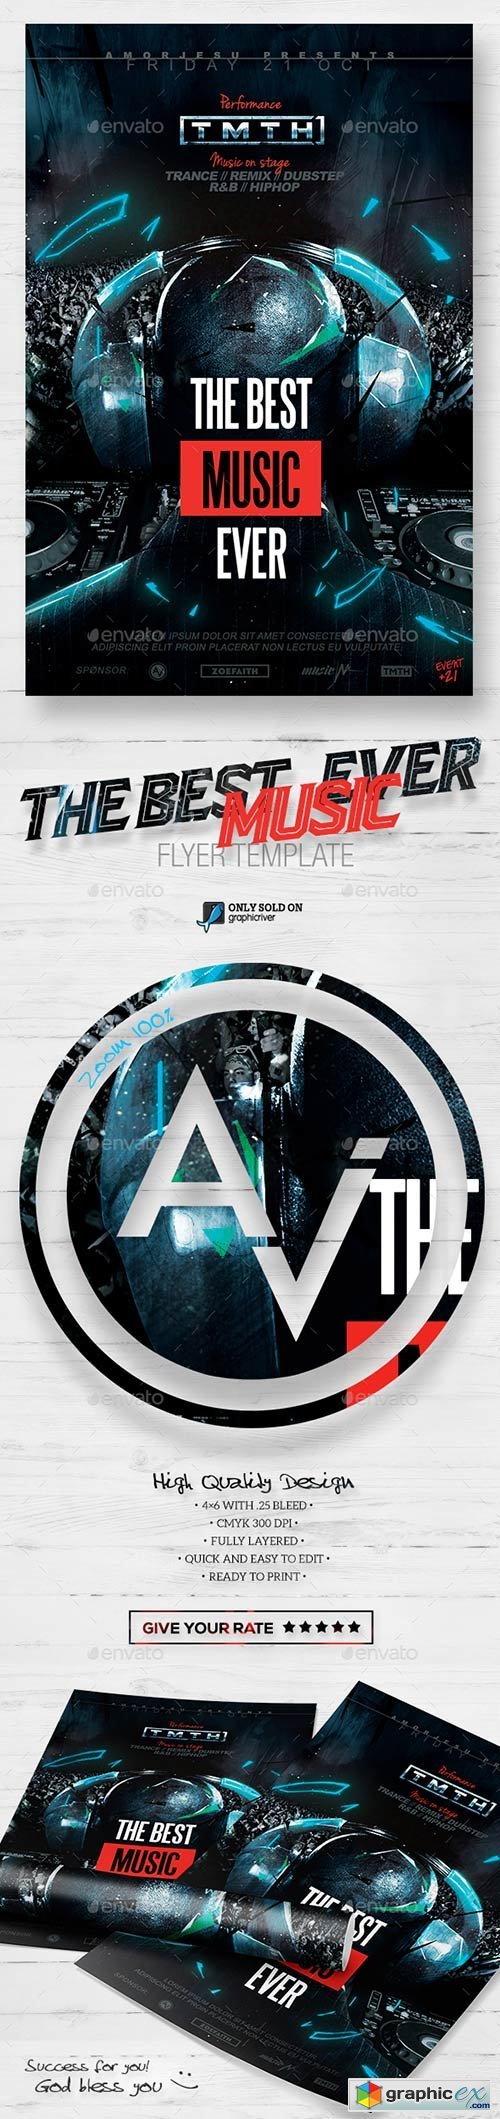 The Music Ever Flyer Template